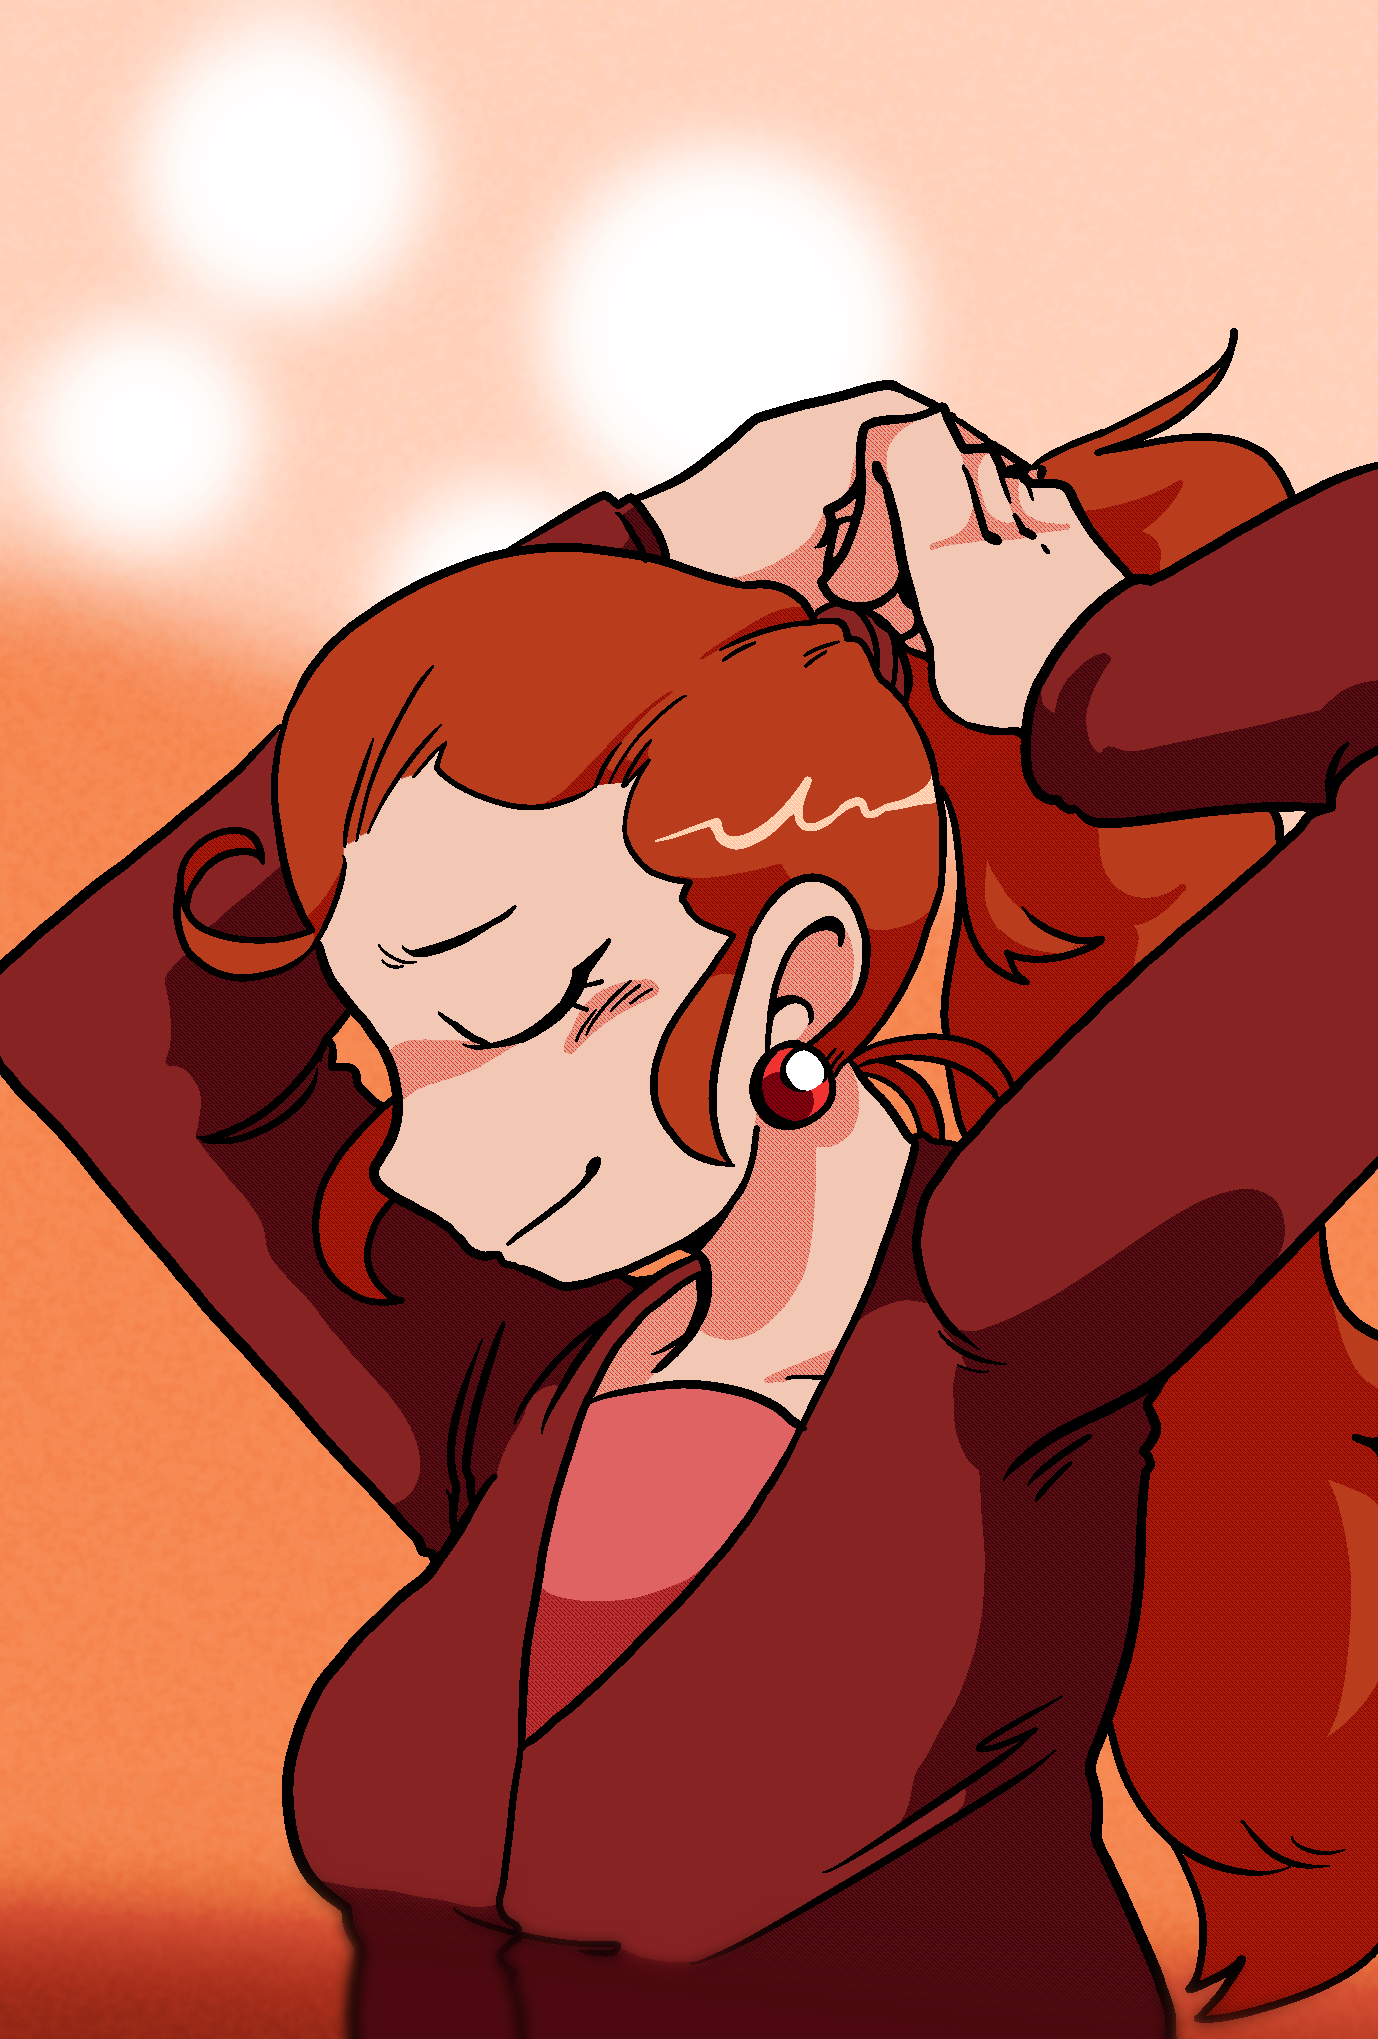 Rachel from Commonplace, gently tying her red hair up in a ponytail.